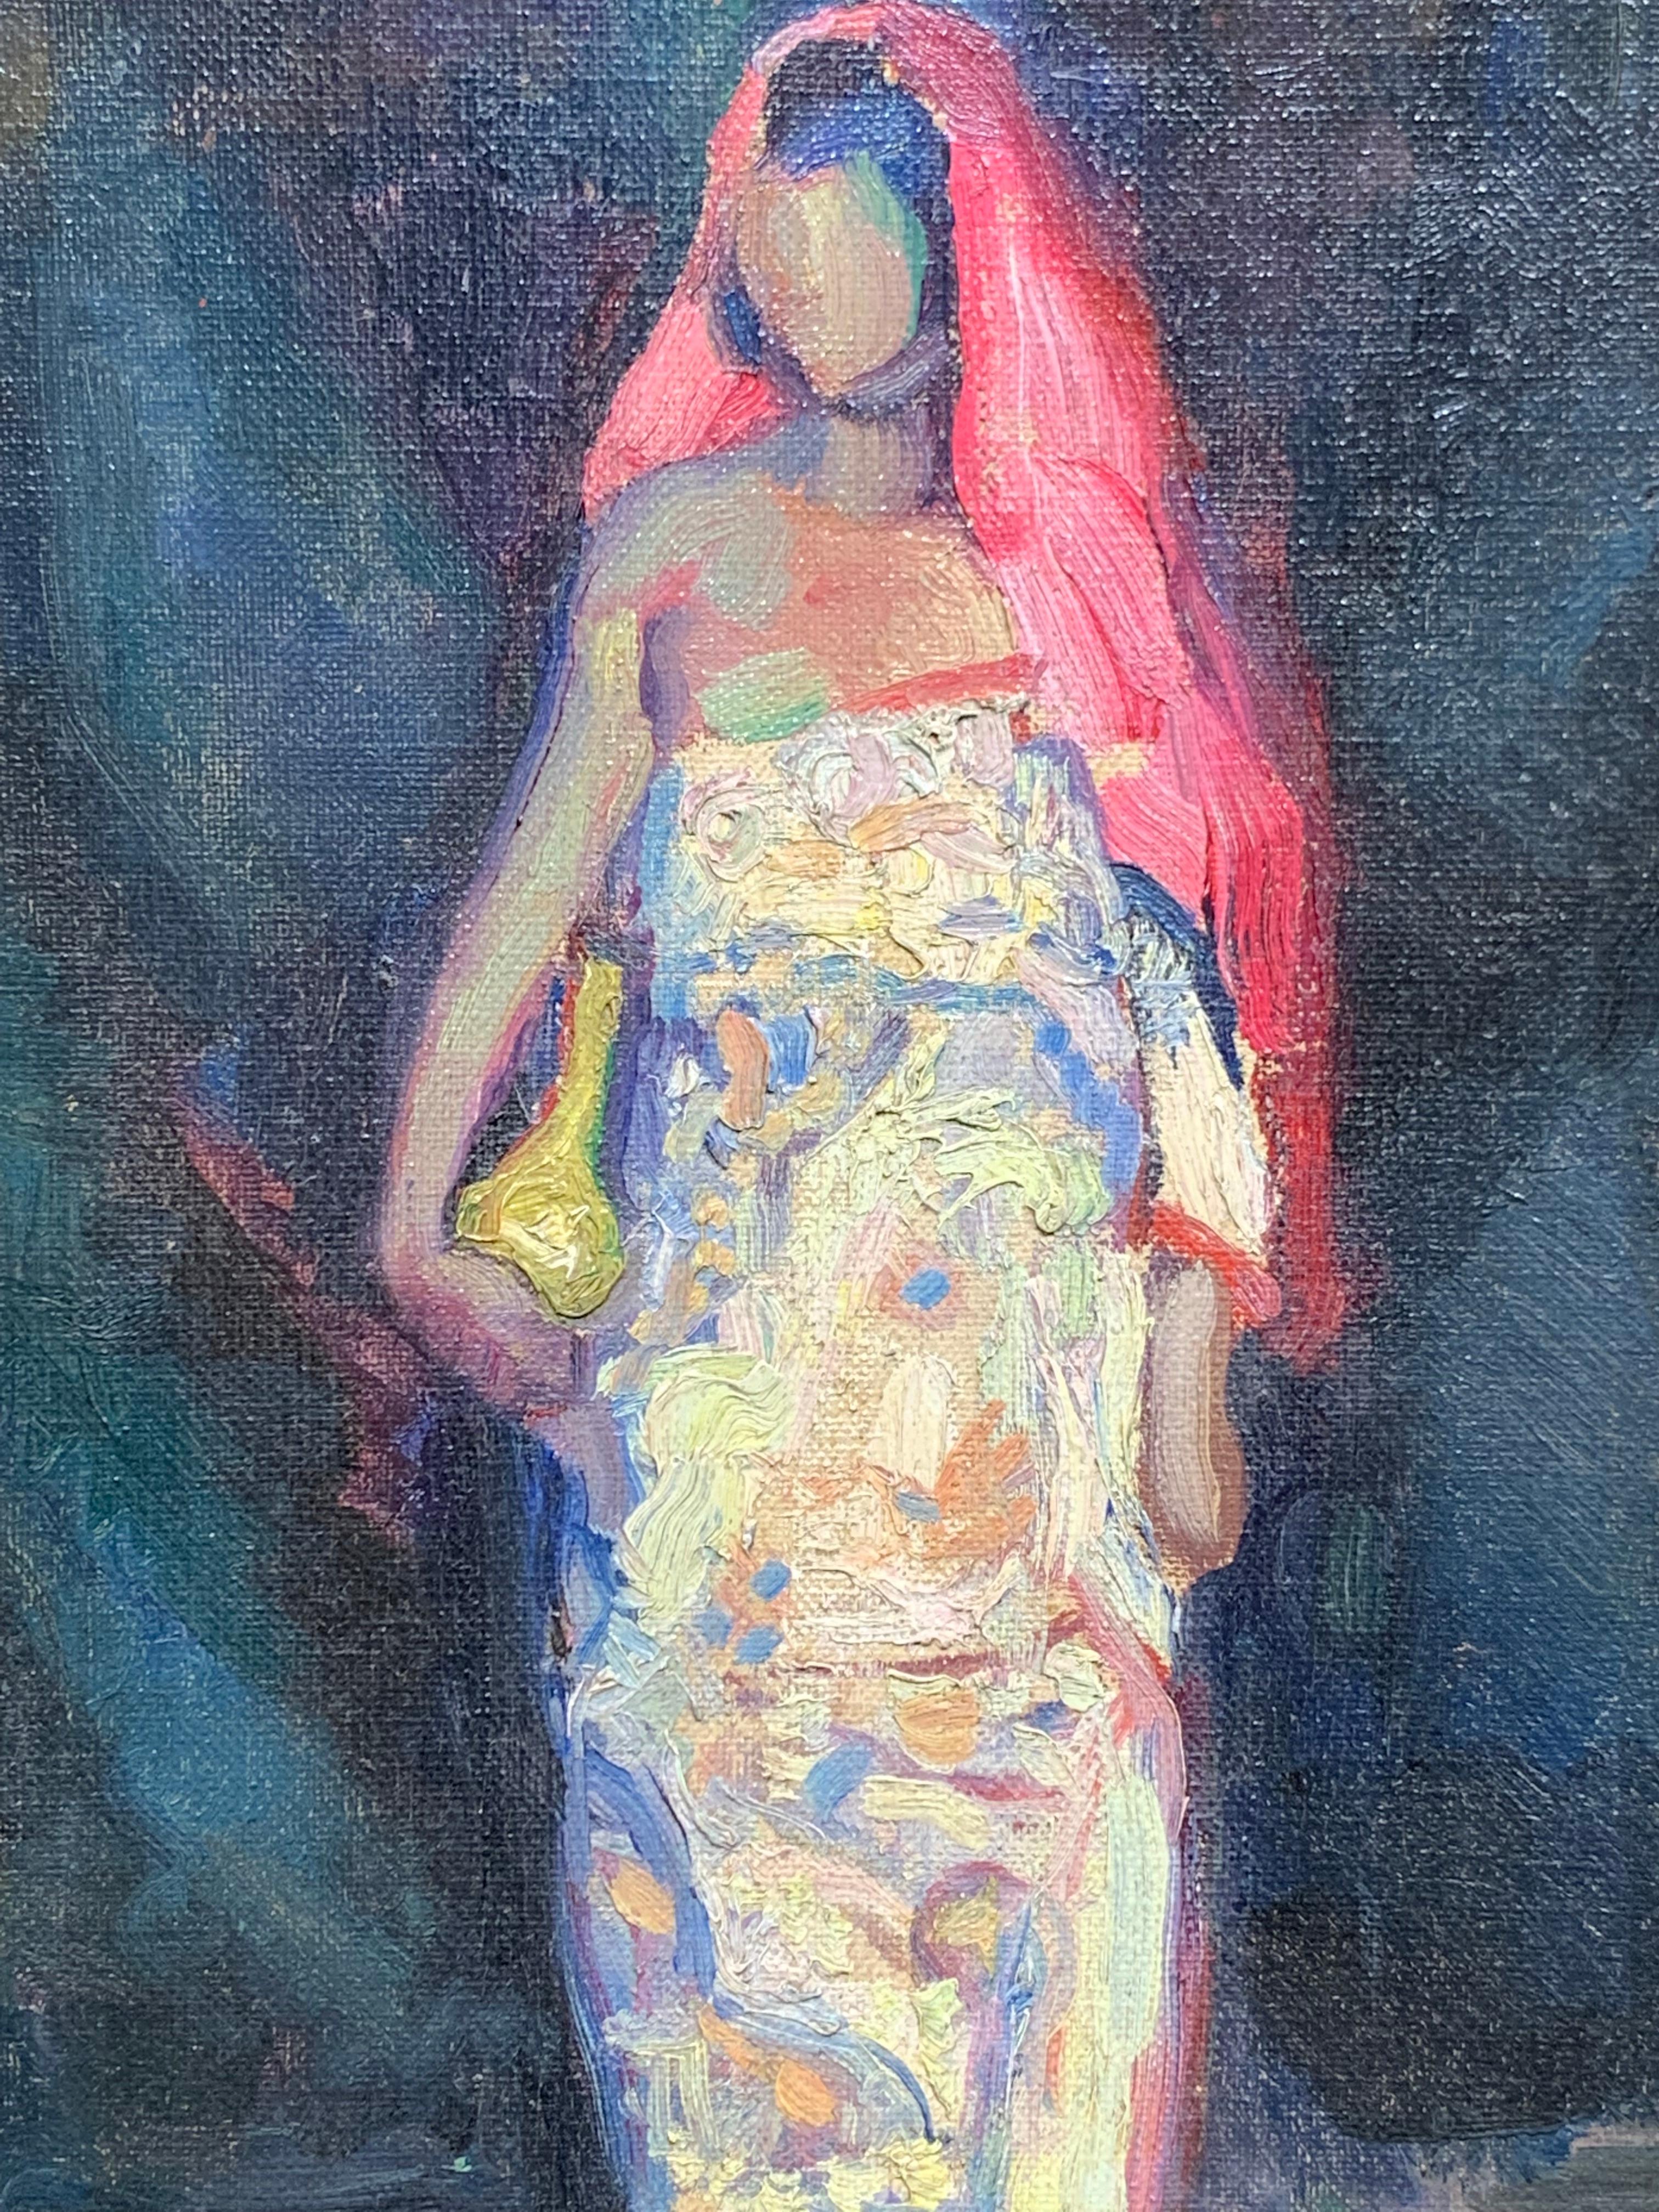 East Indian (Impressionist Figure) - Painting by Marian D. Harris